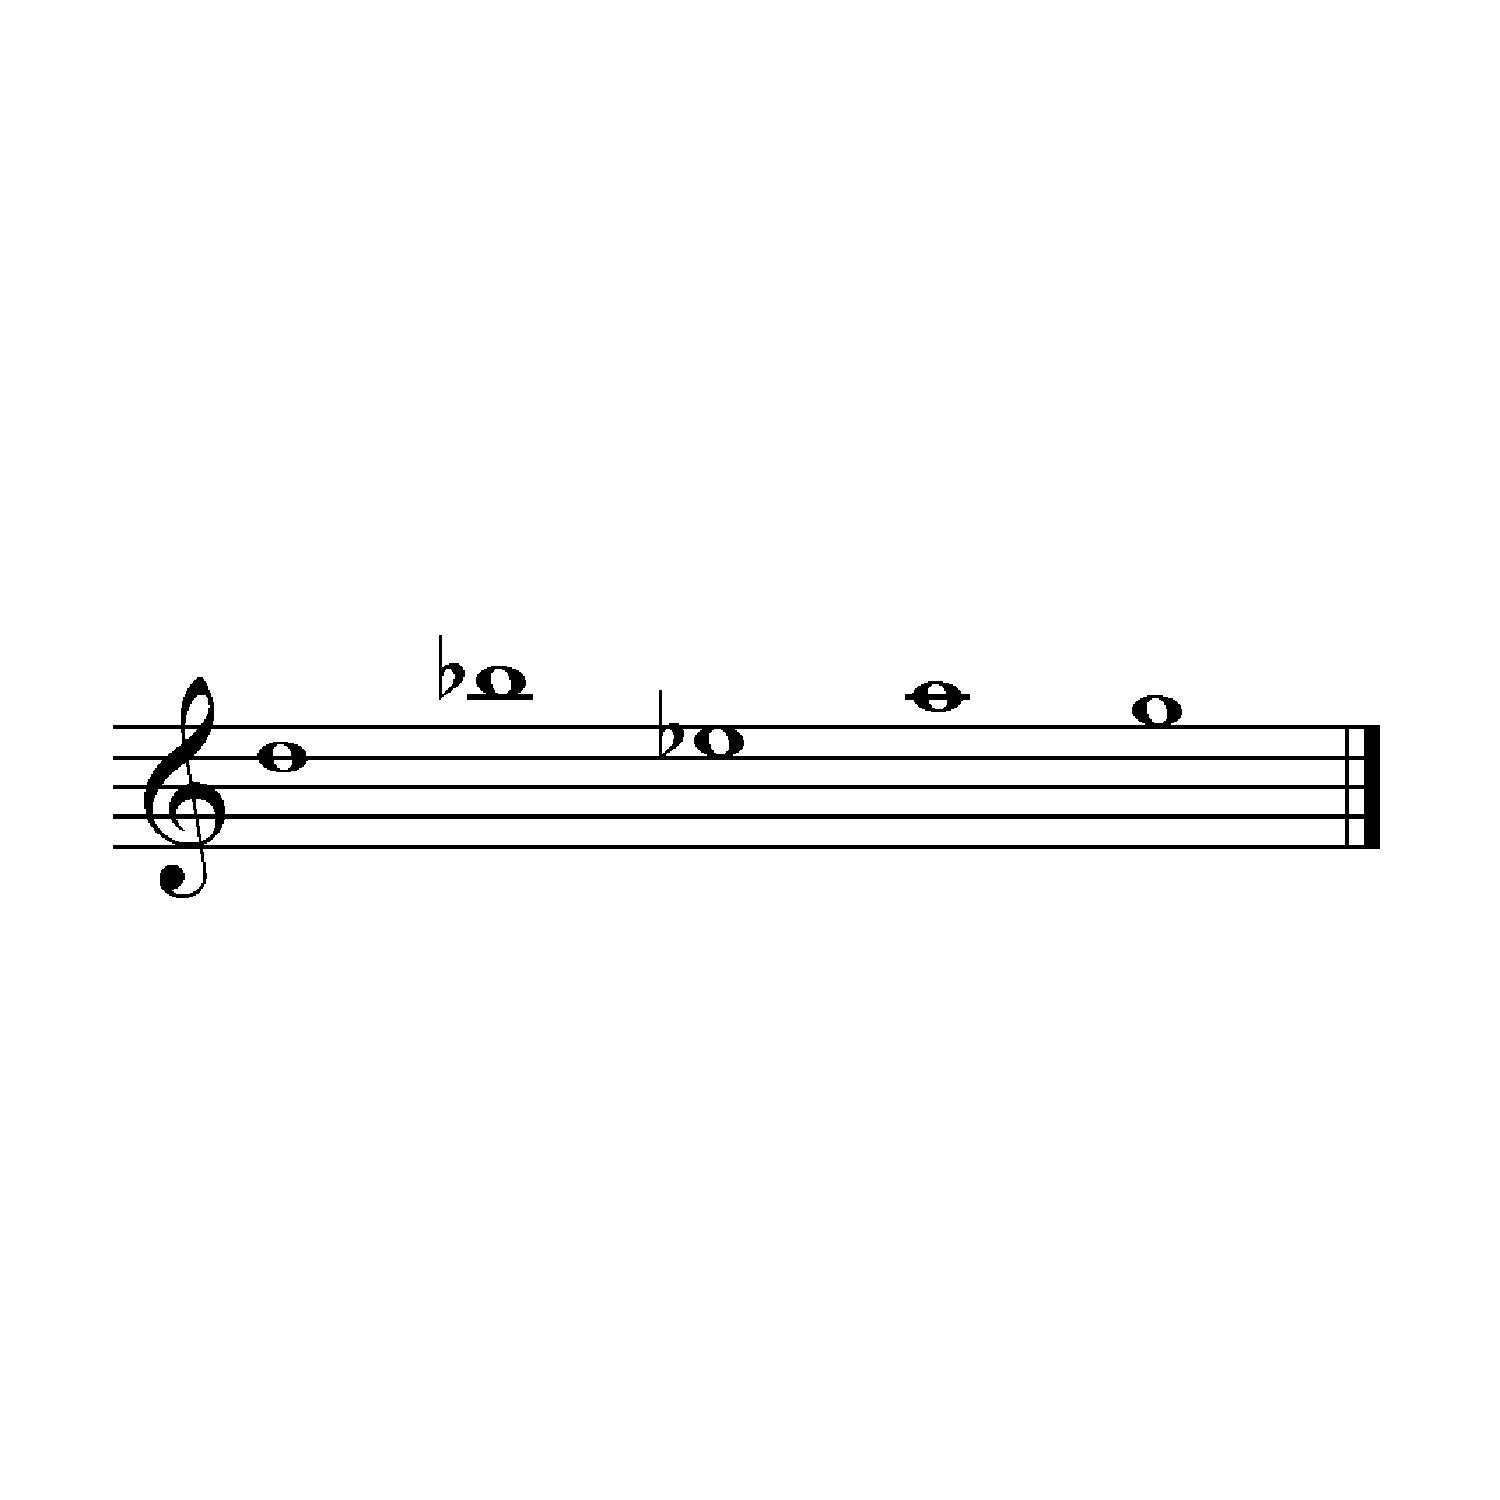 Encore Chimes of Mars - Black musical scale